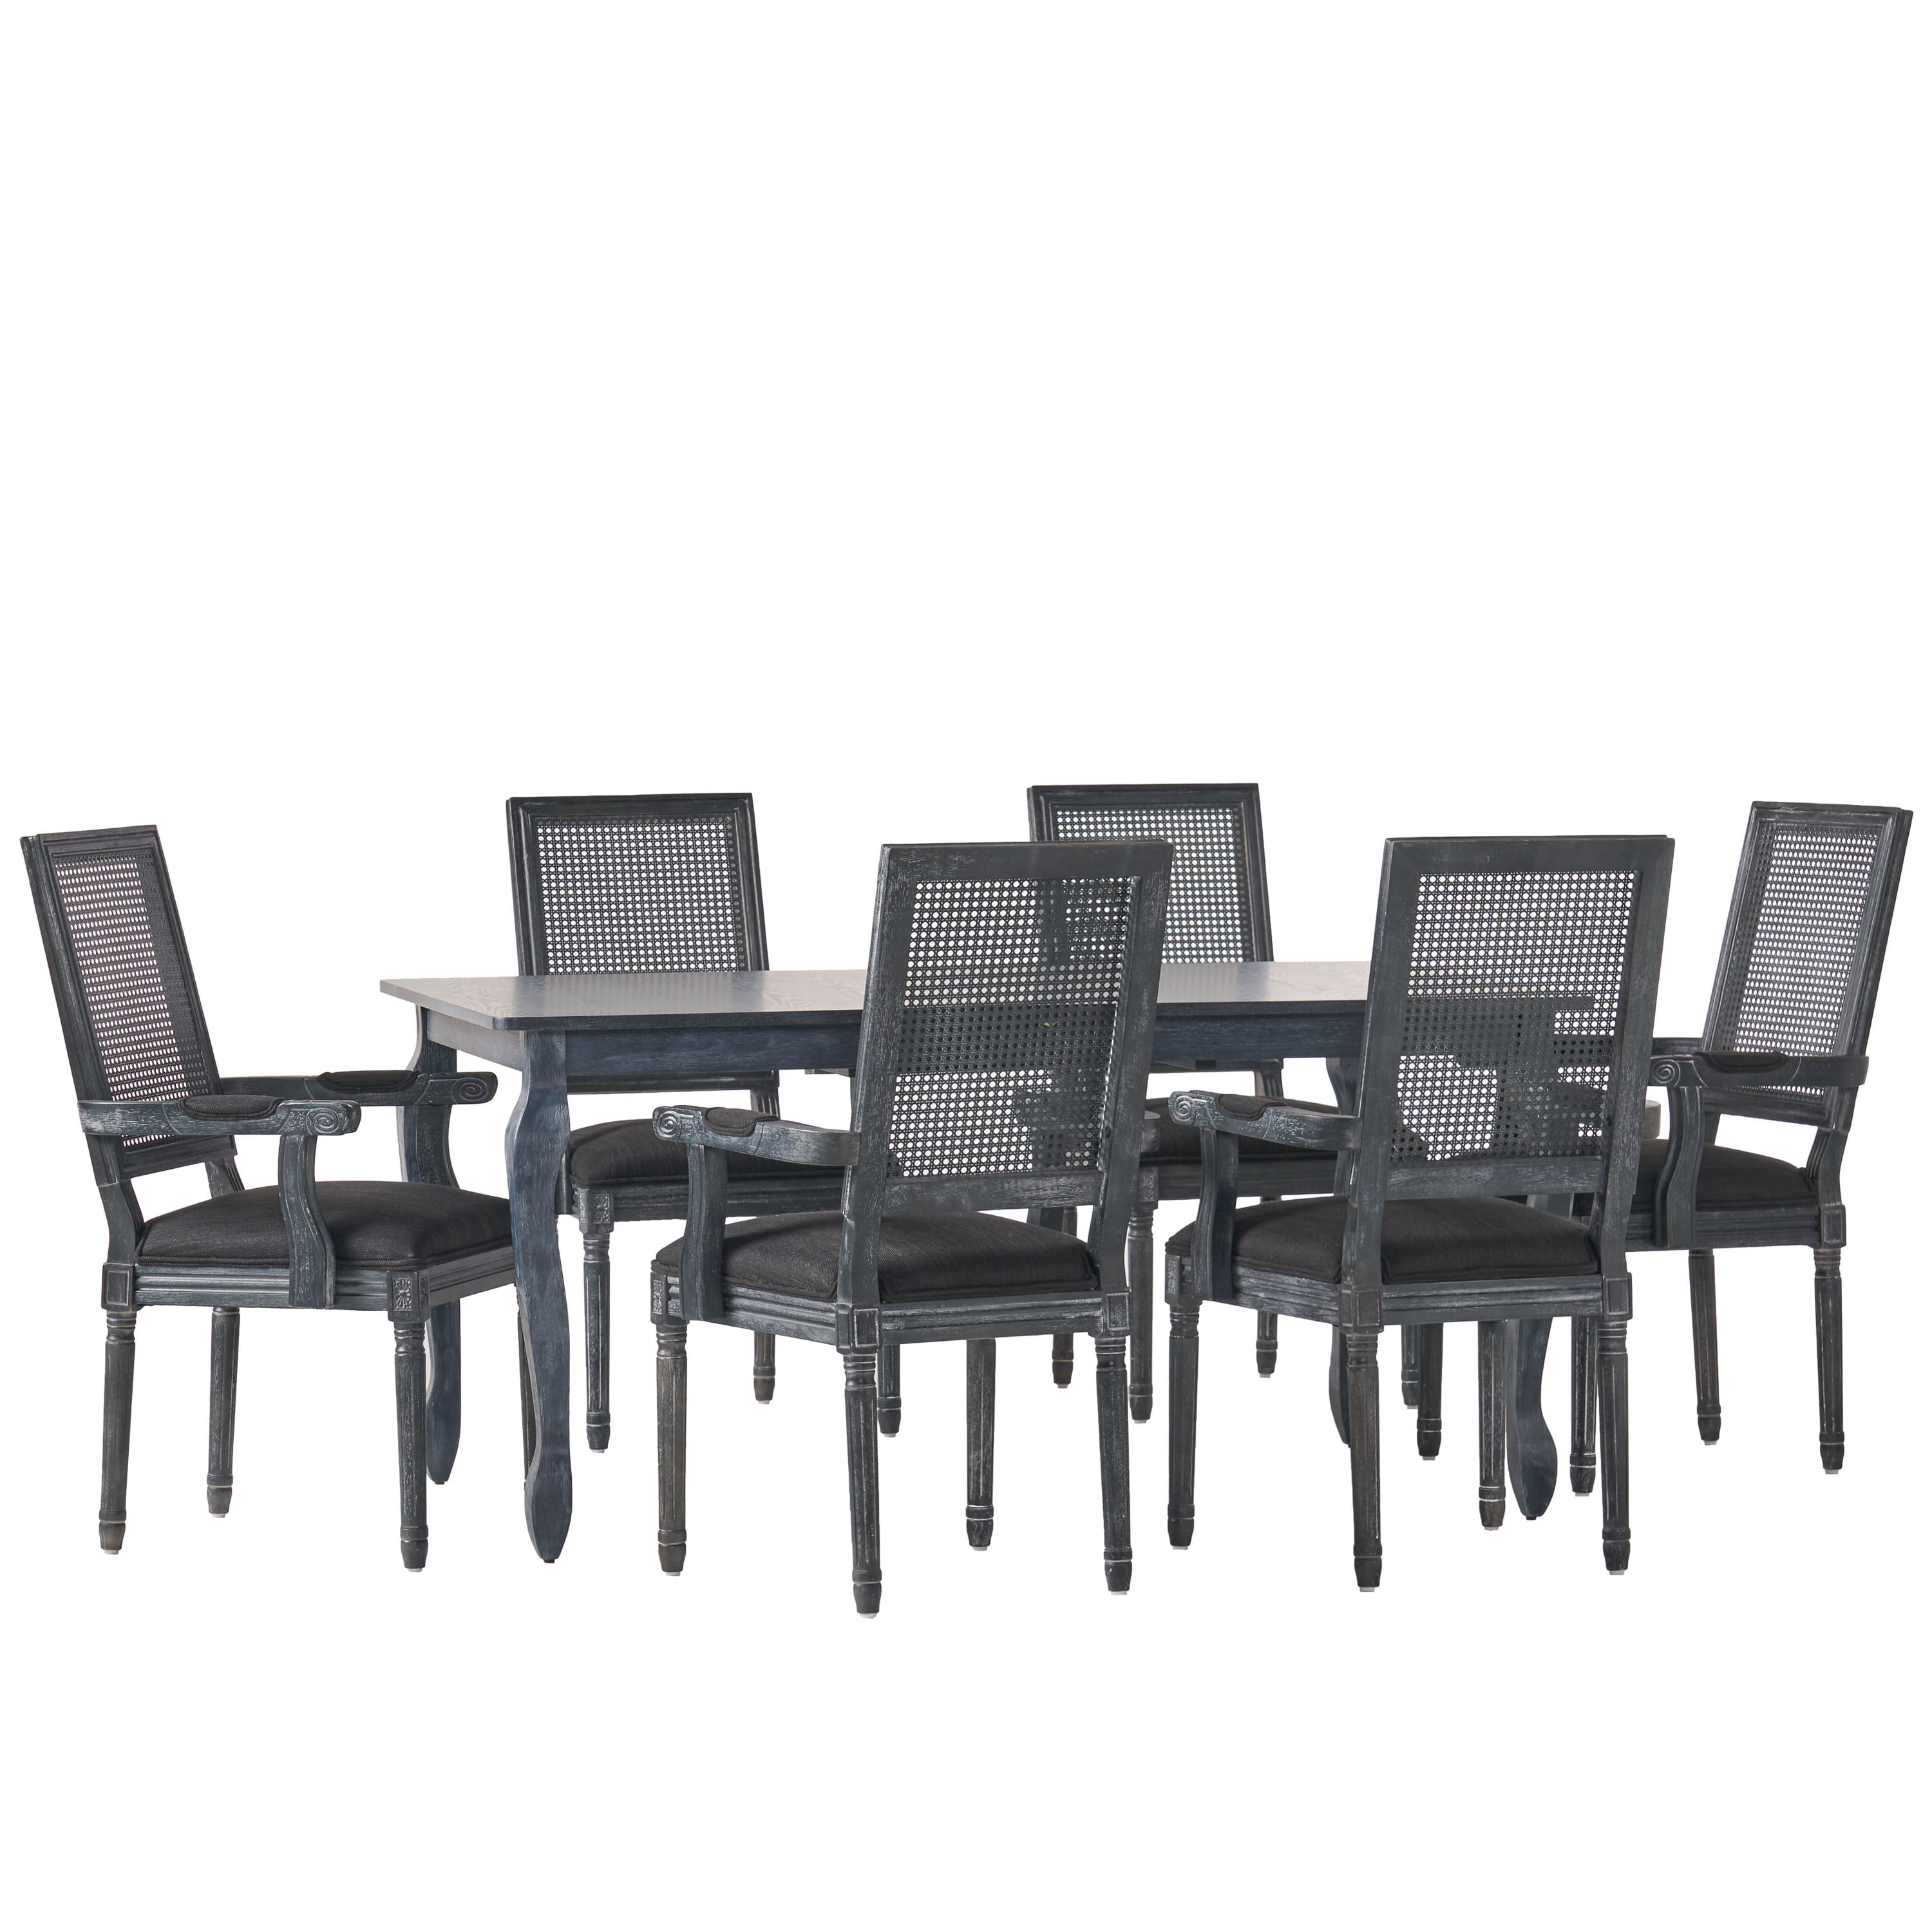 GDF Studio Regan French Country Fabric Upholstered Wood and Cane Expandable 7 Piece Dining Set, Gray and Black Promo